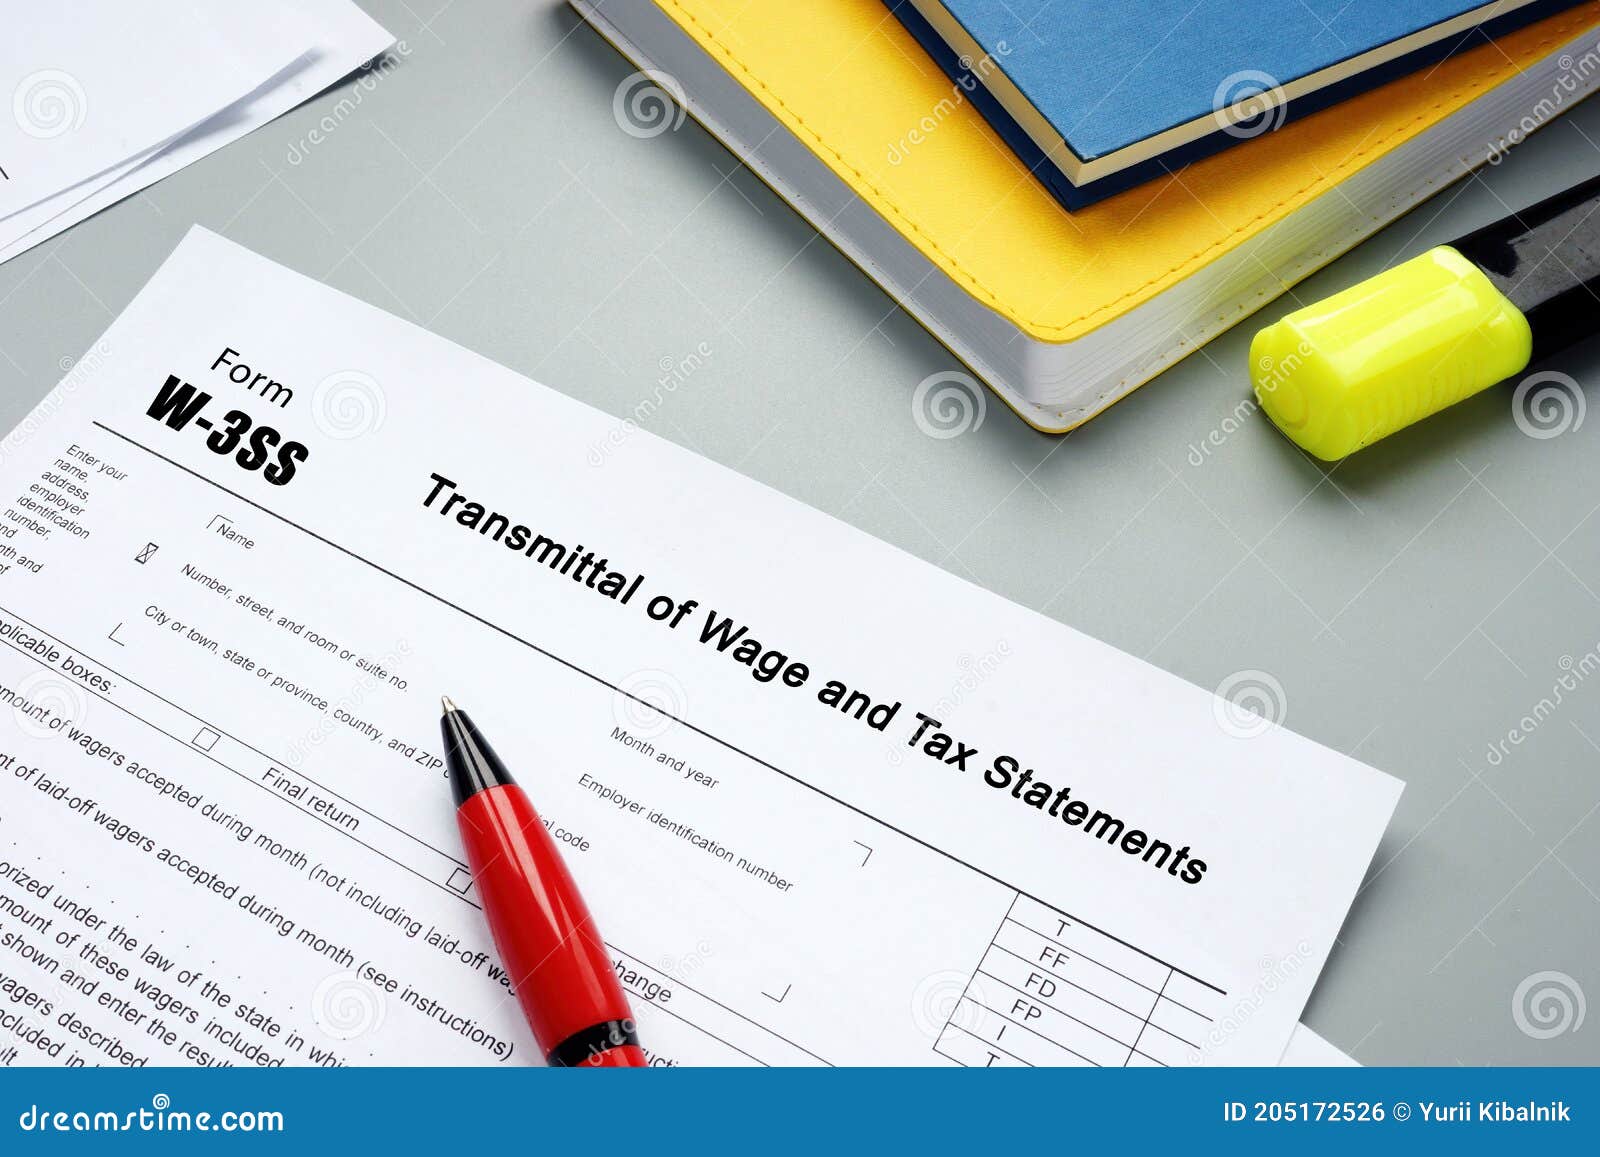 financial-concept-about-form-w-3ss-transmittal-of-wage-and-tax